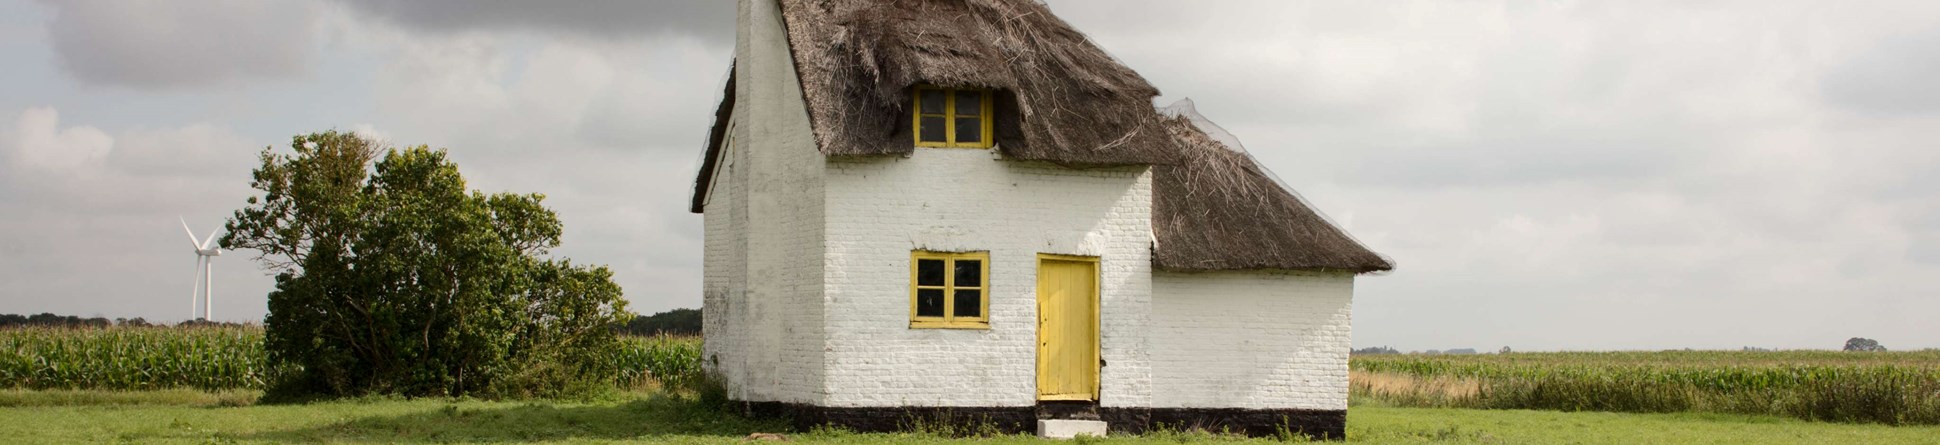 View of small white cottage with thatched roof and yellow doors in a field with no path or road leading to it.